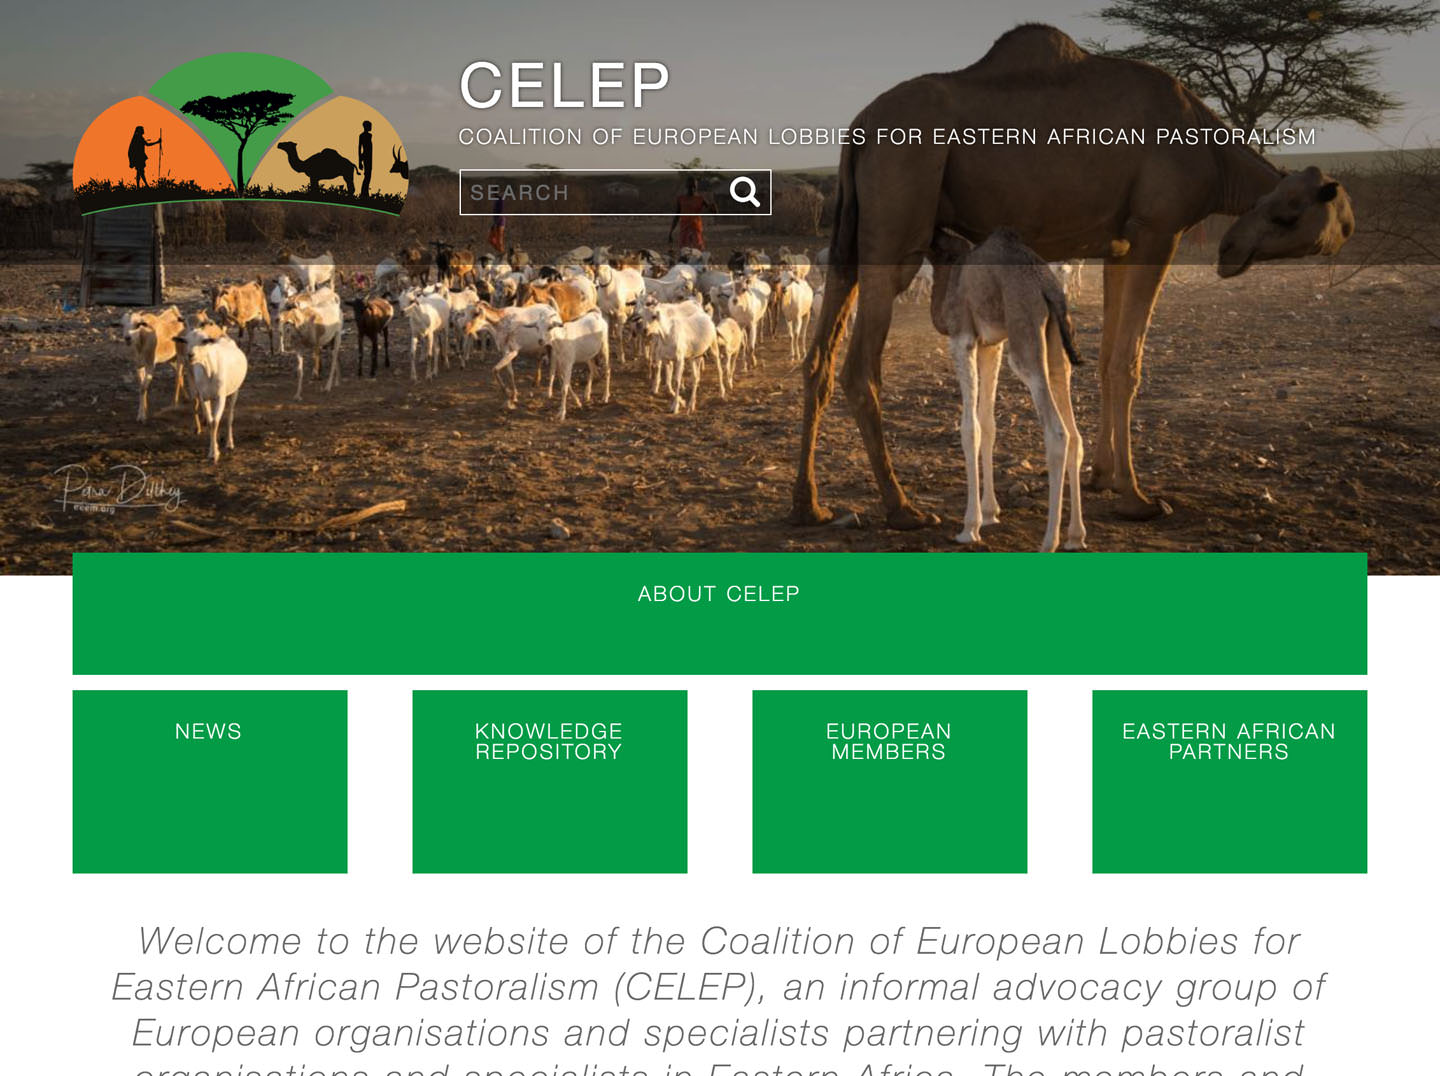 The homepage of CELEP on desktop-sized screens.